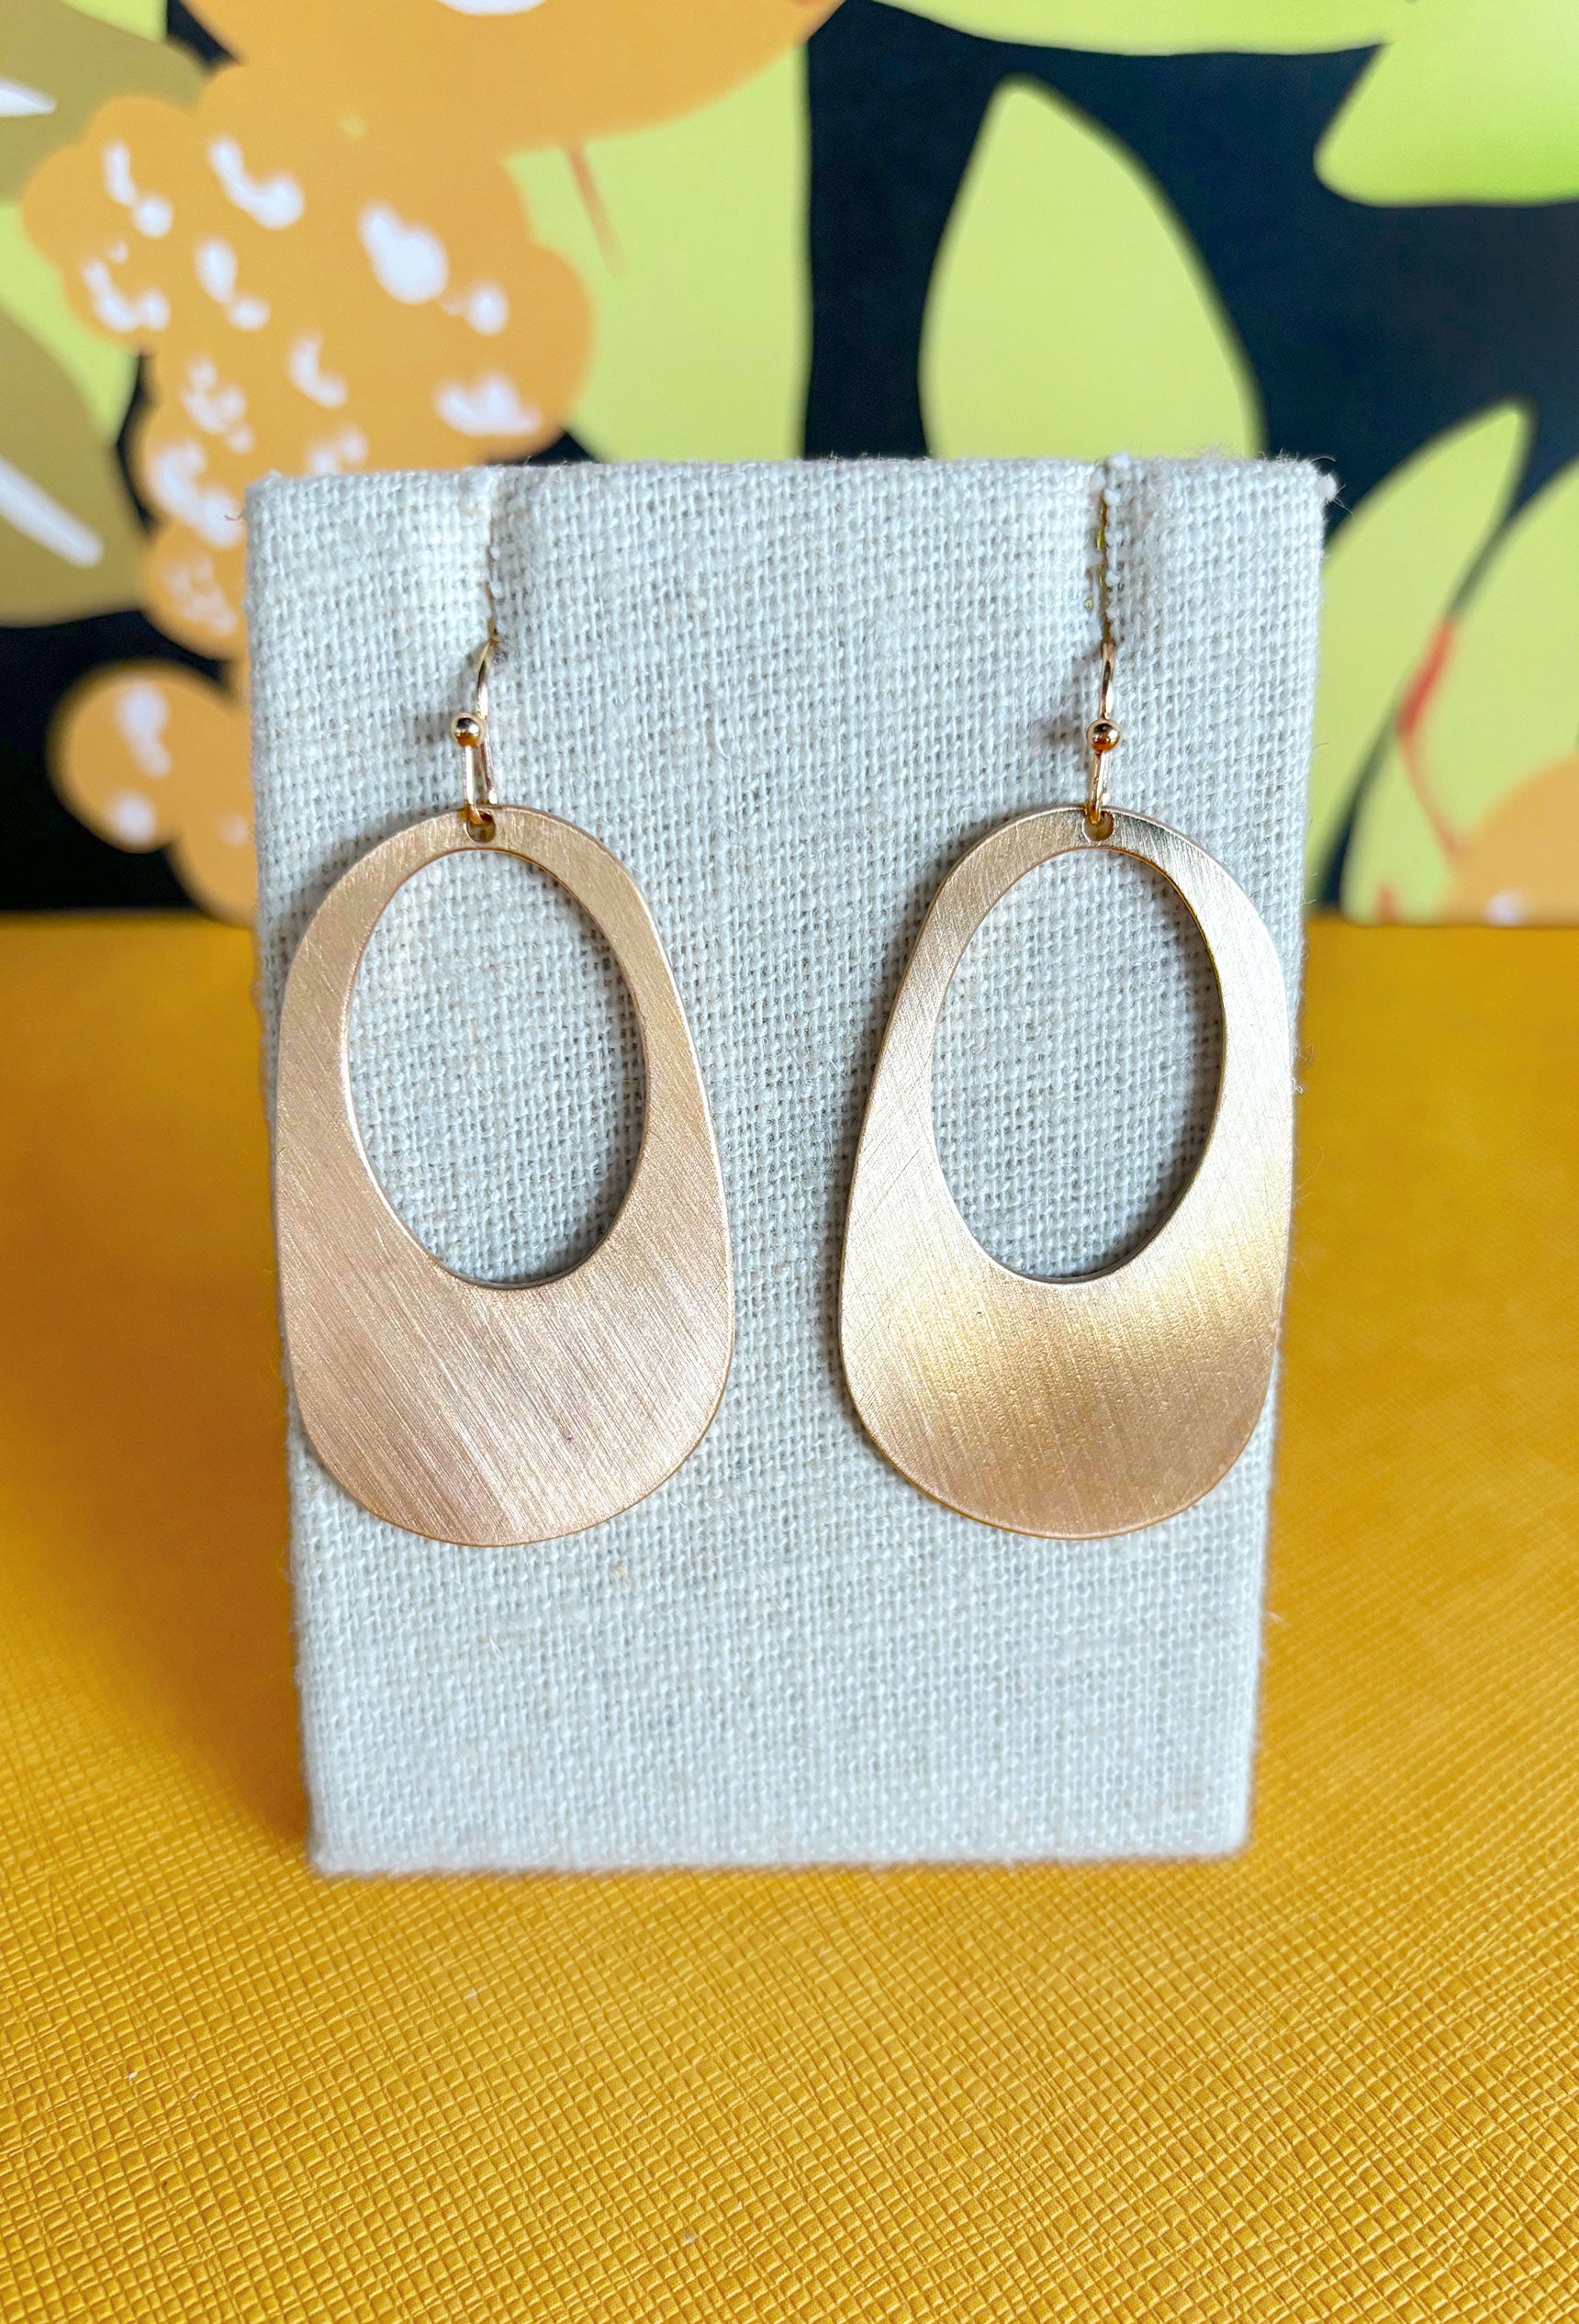 Come As You Are Earrings, gold oval dangle earrings 